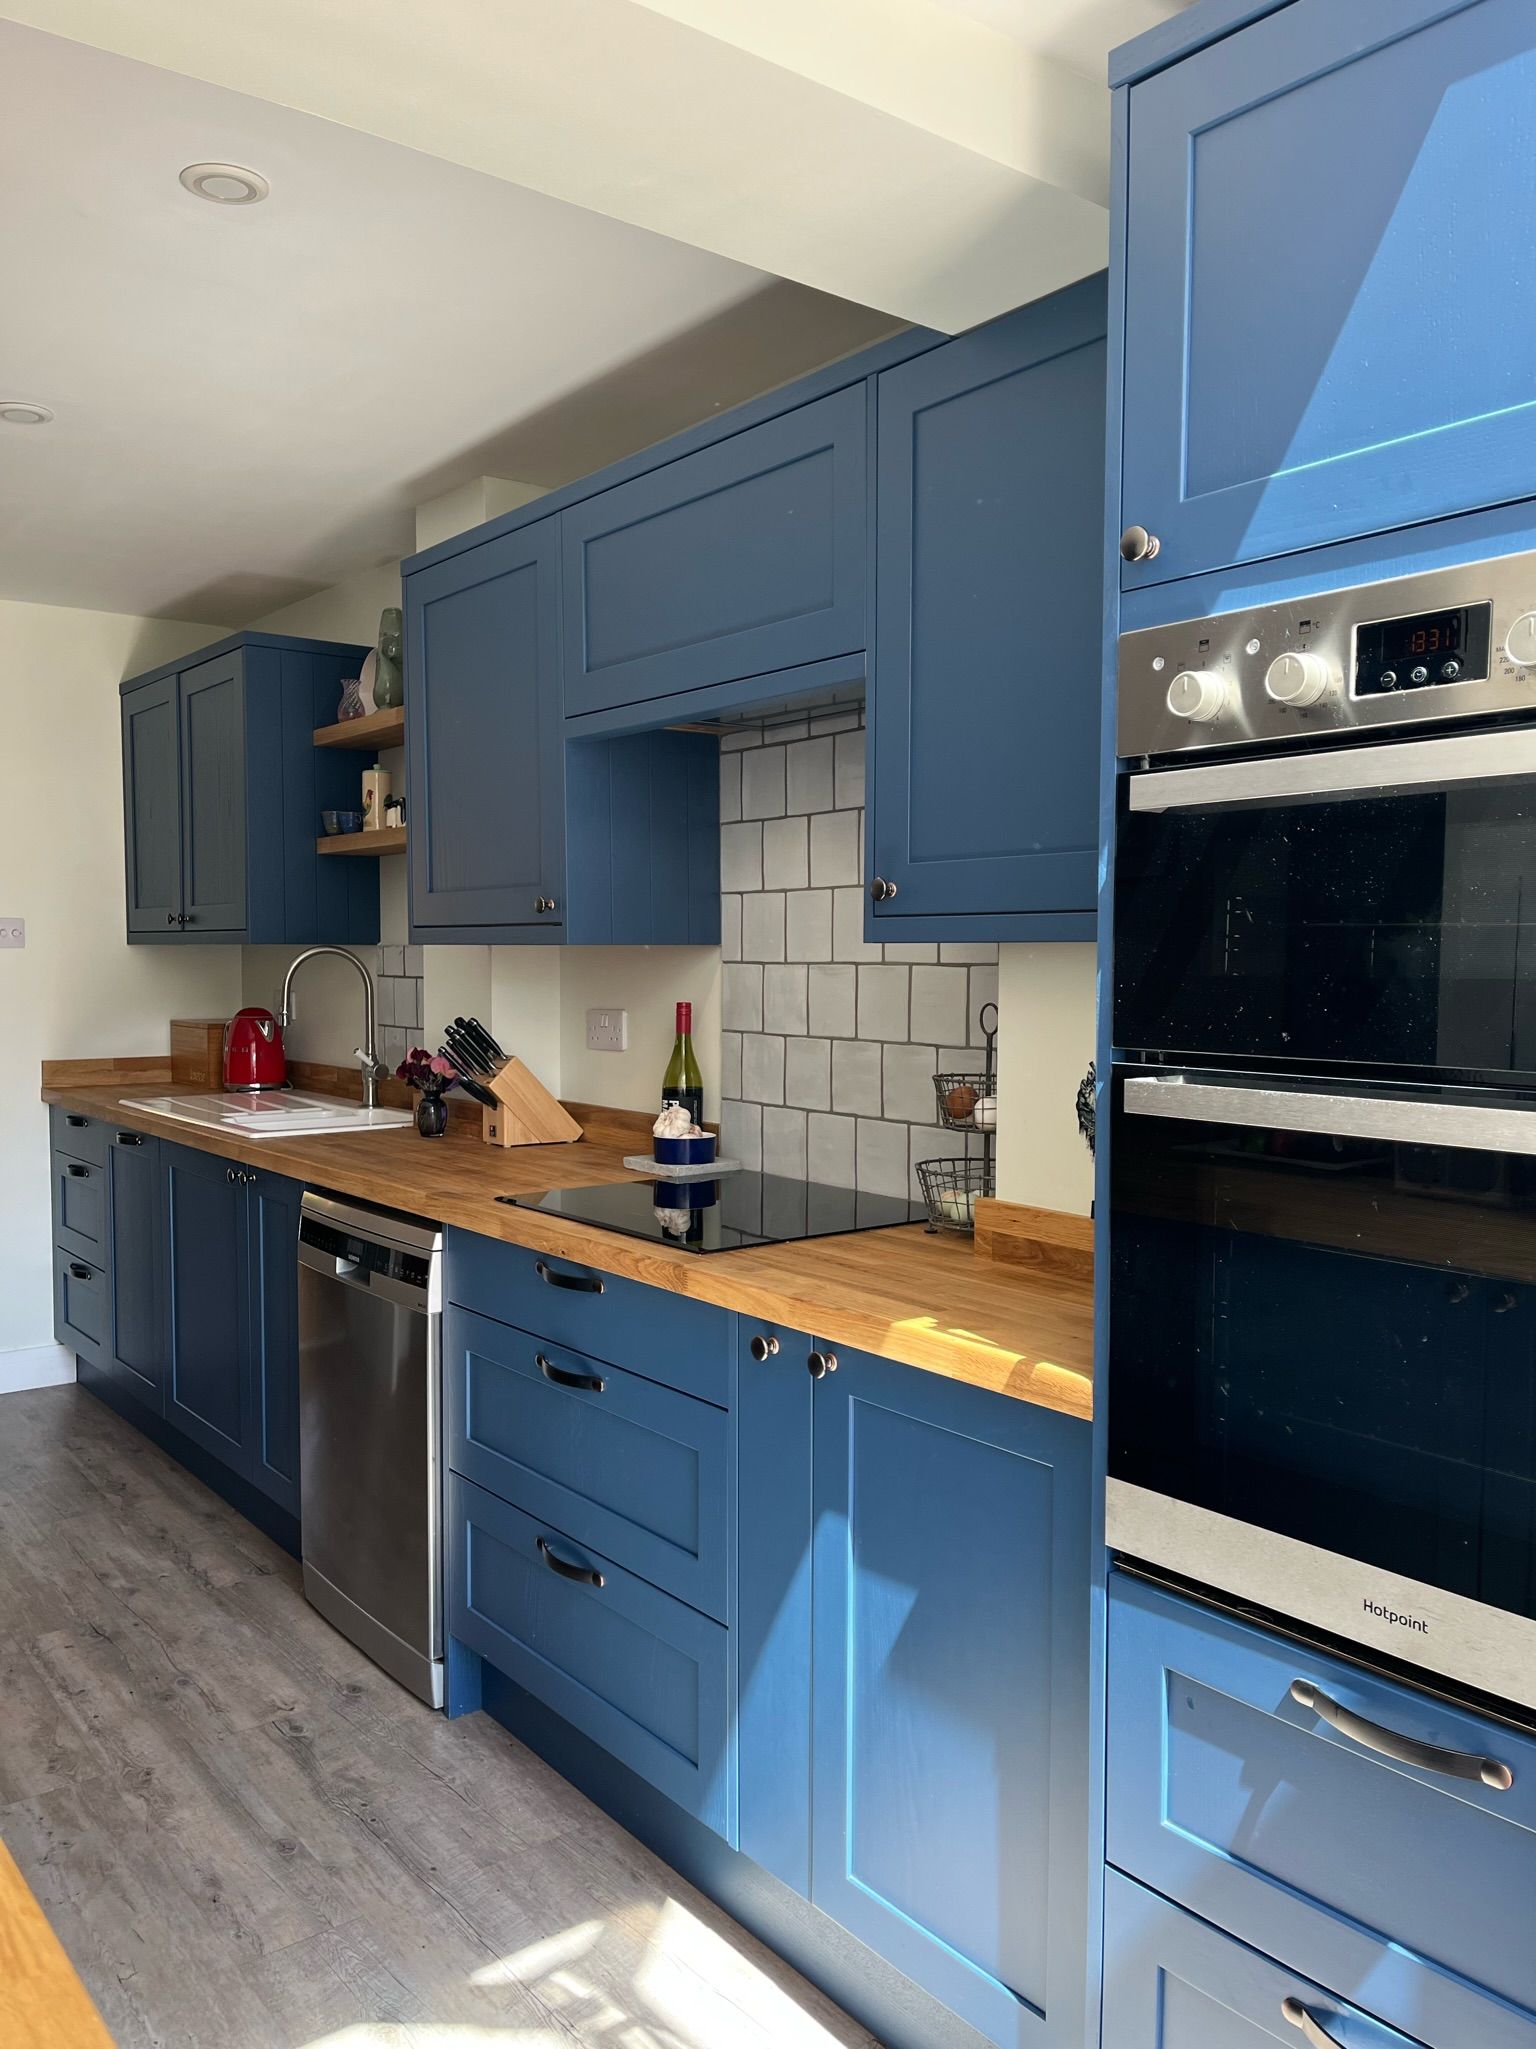 Traditional galley kitchen with blue doors, oak worktops and eye level ovens